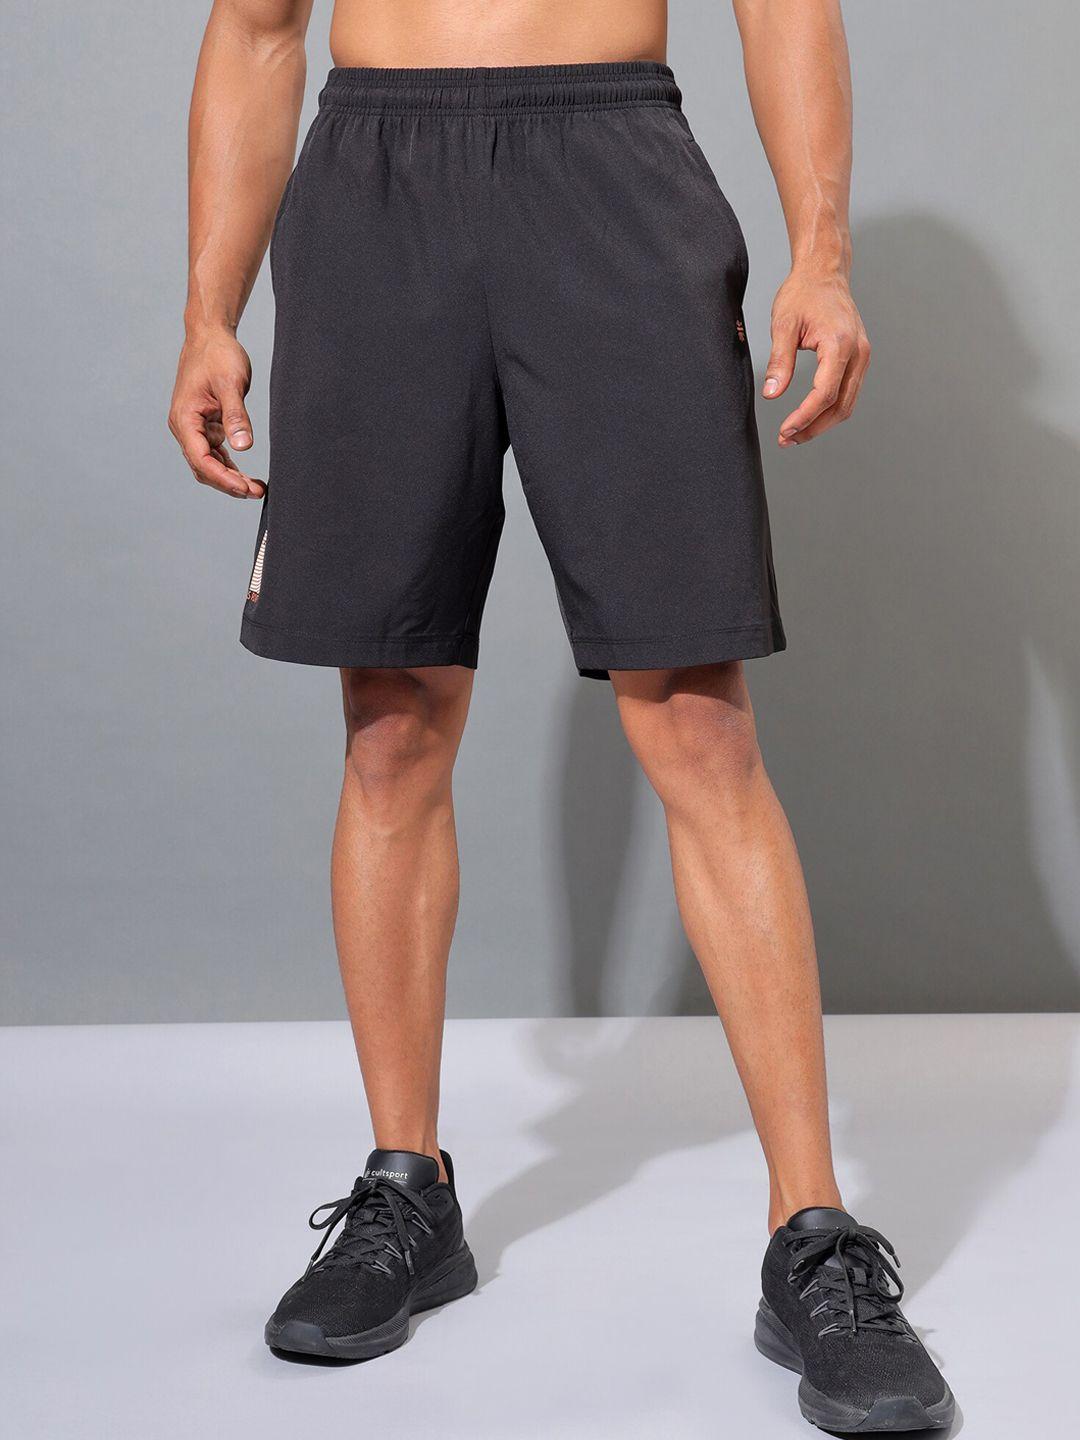 cultsportone-men-black-solid-training-or-gym-active-sports-shorts